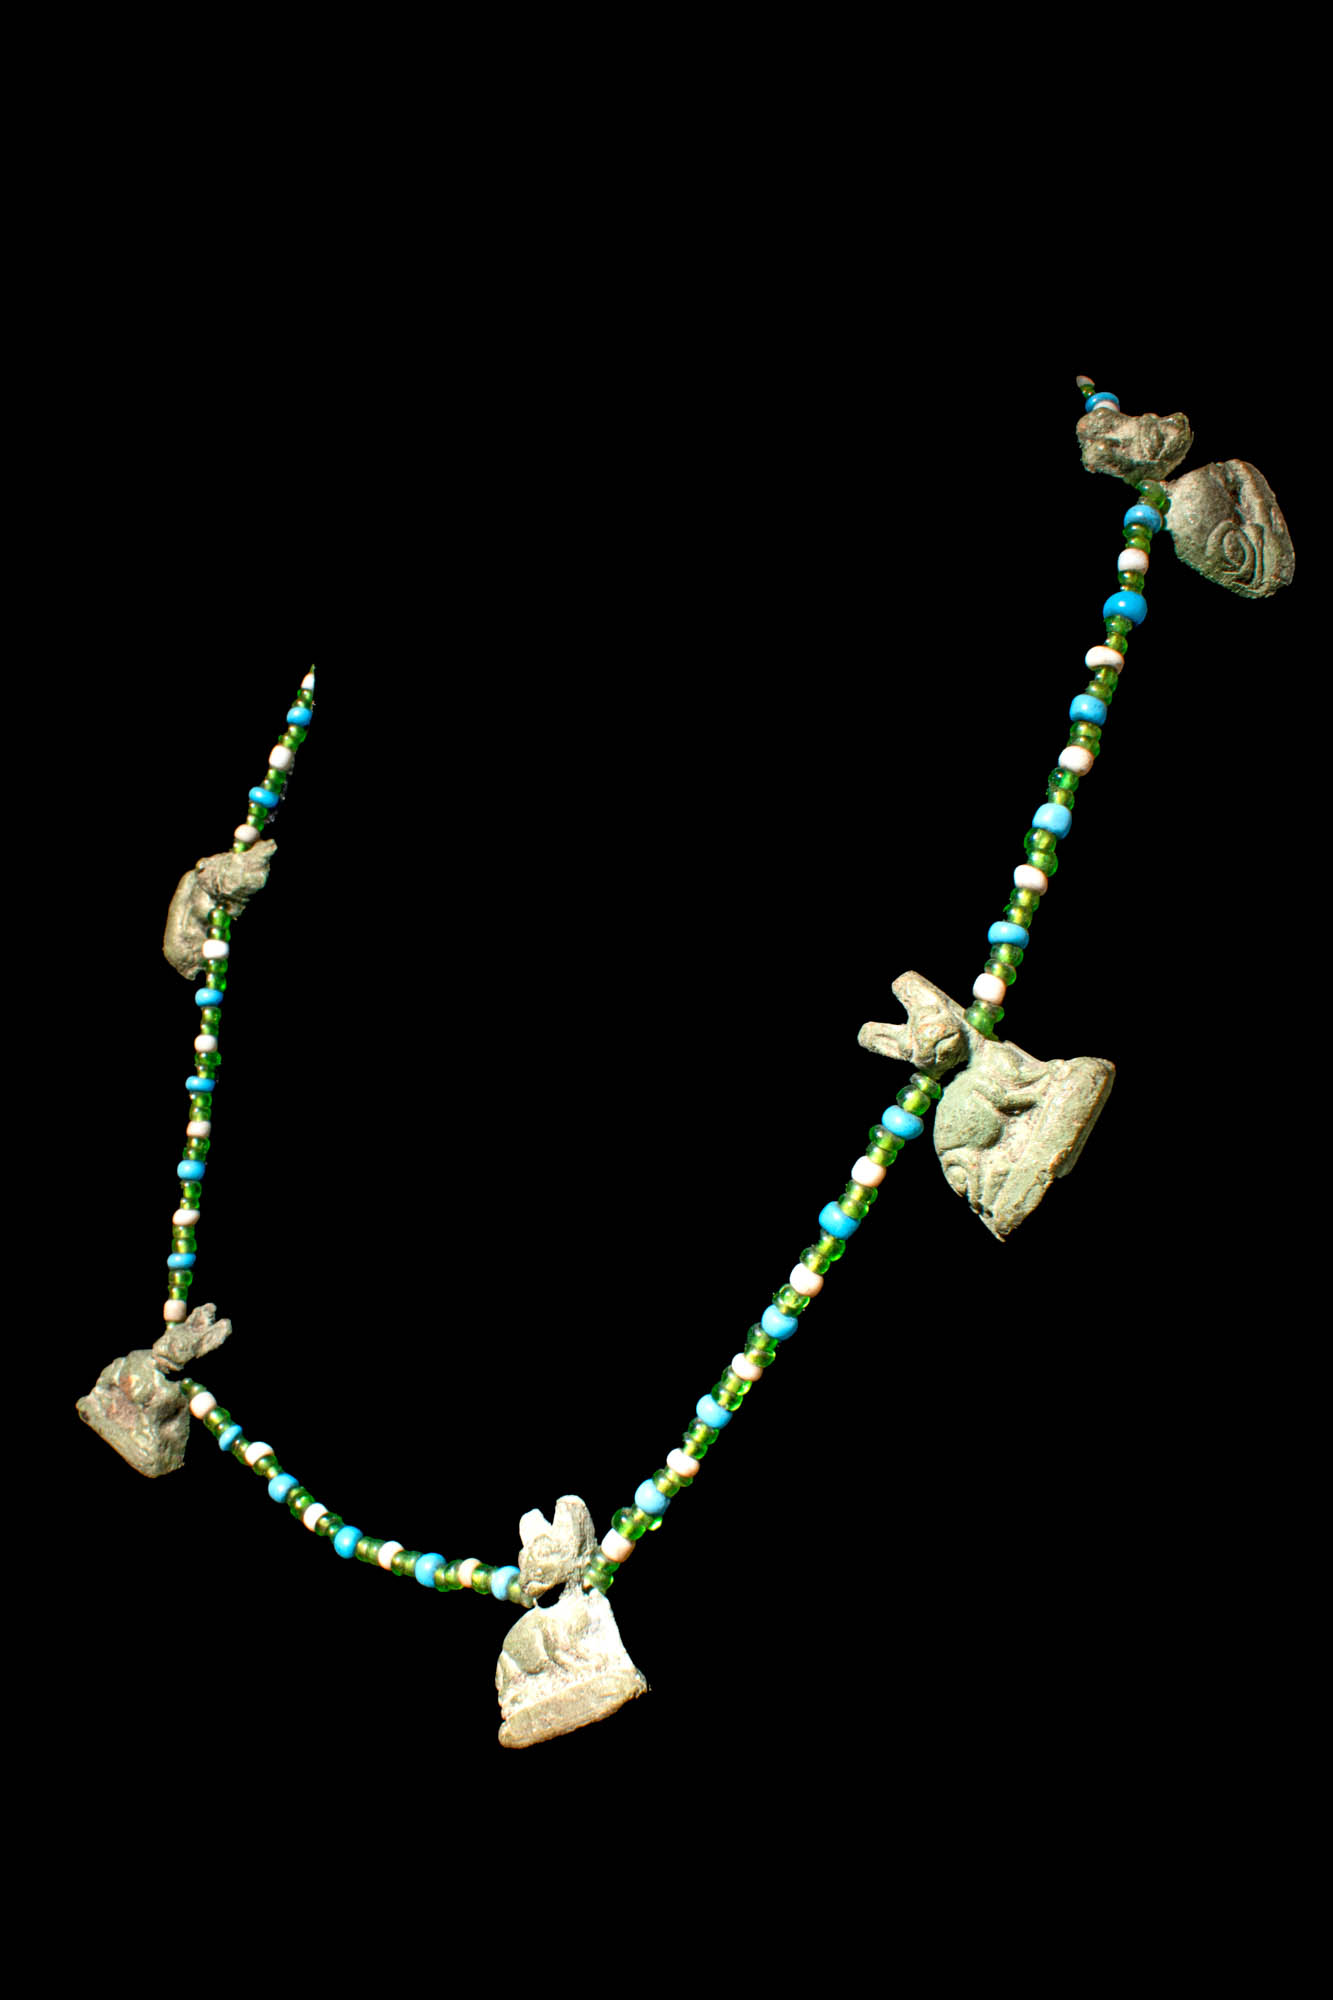 ROMANO-EGYPTIAN NECKLACE WITH CAT AMULETS - Image 6 of 6